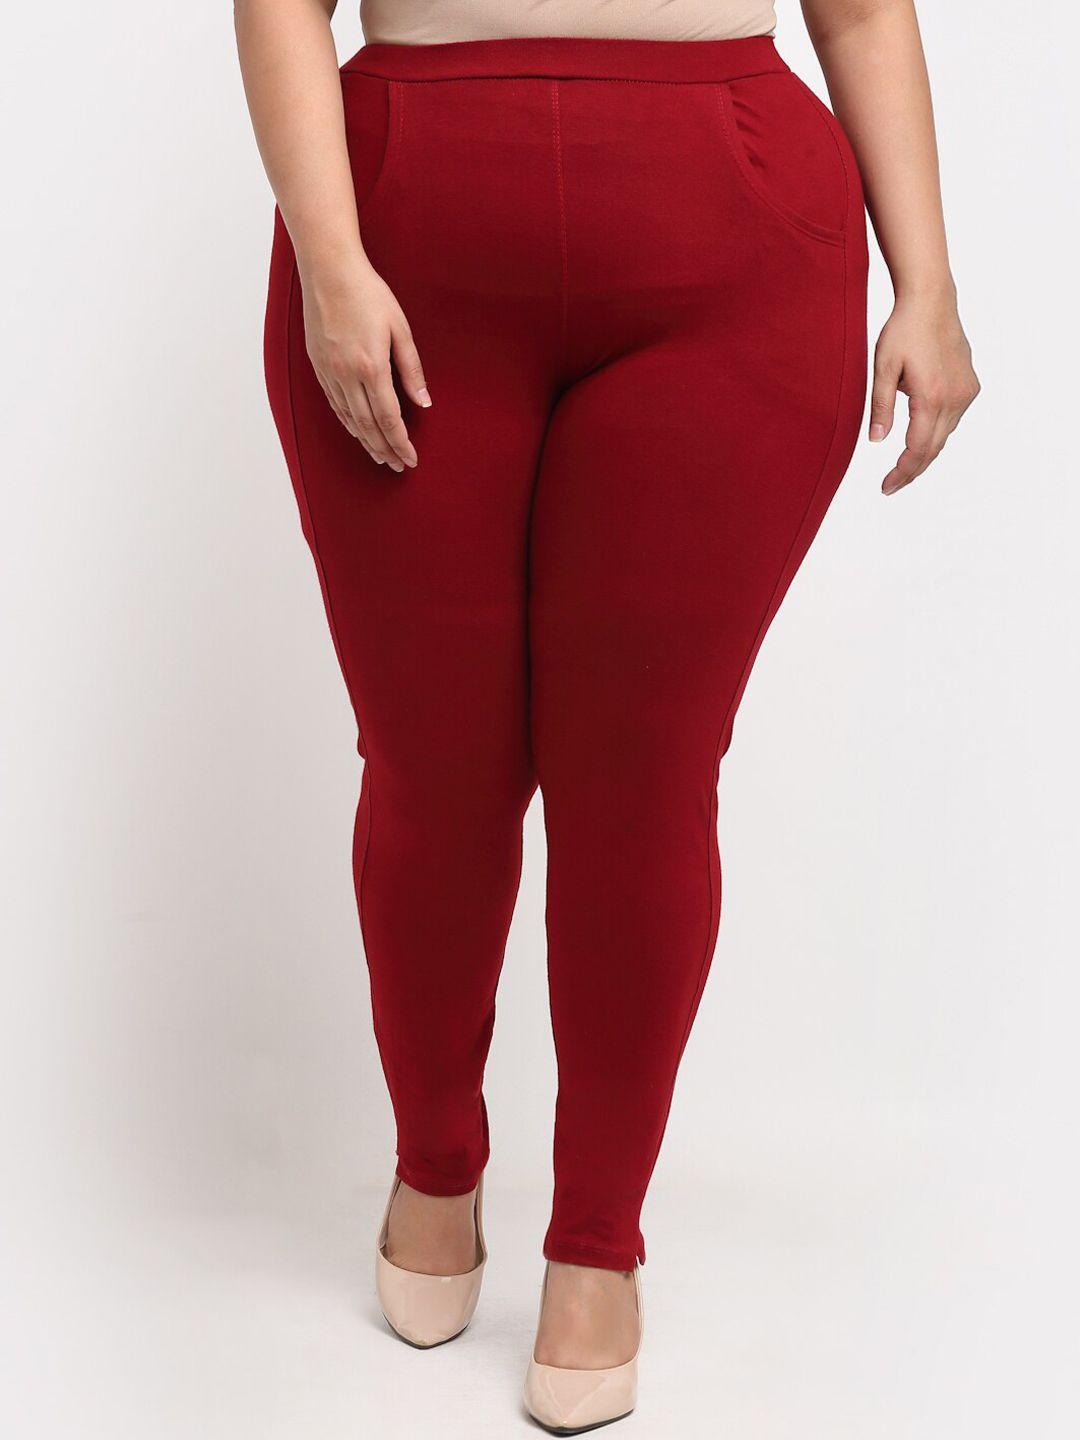 tag 7 plus women plus size maroon solid ankle length leggings